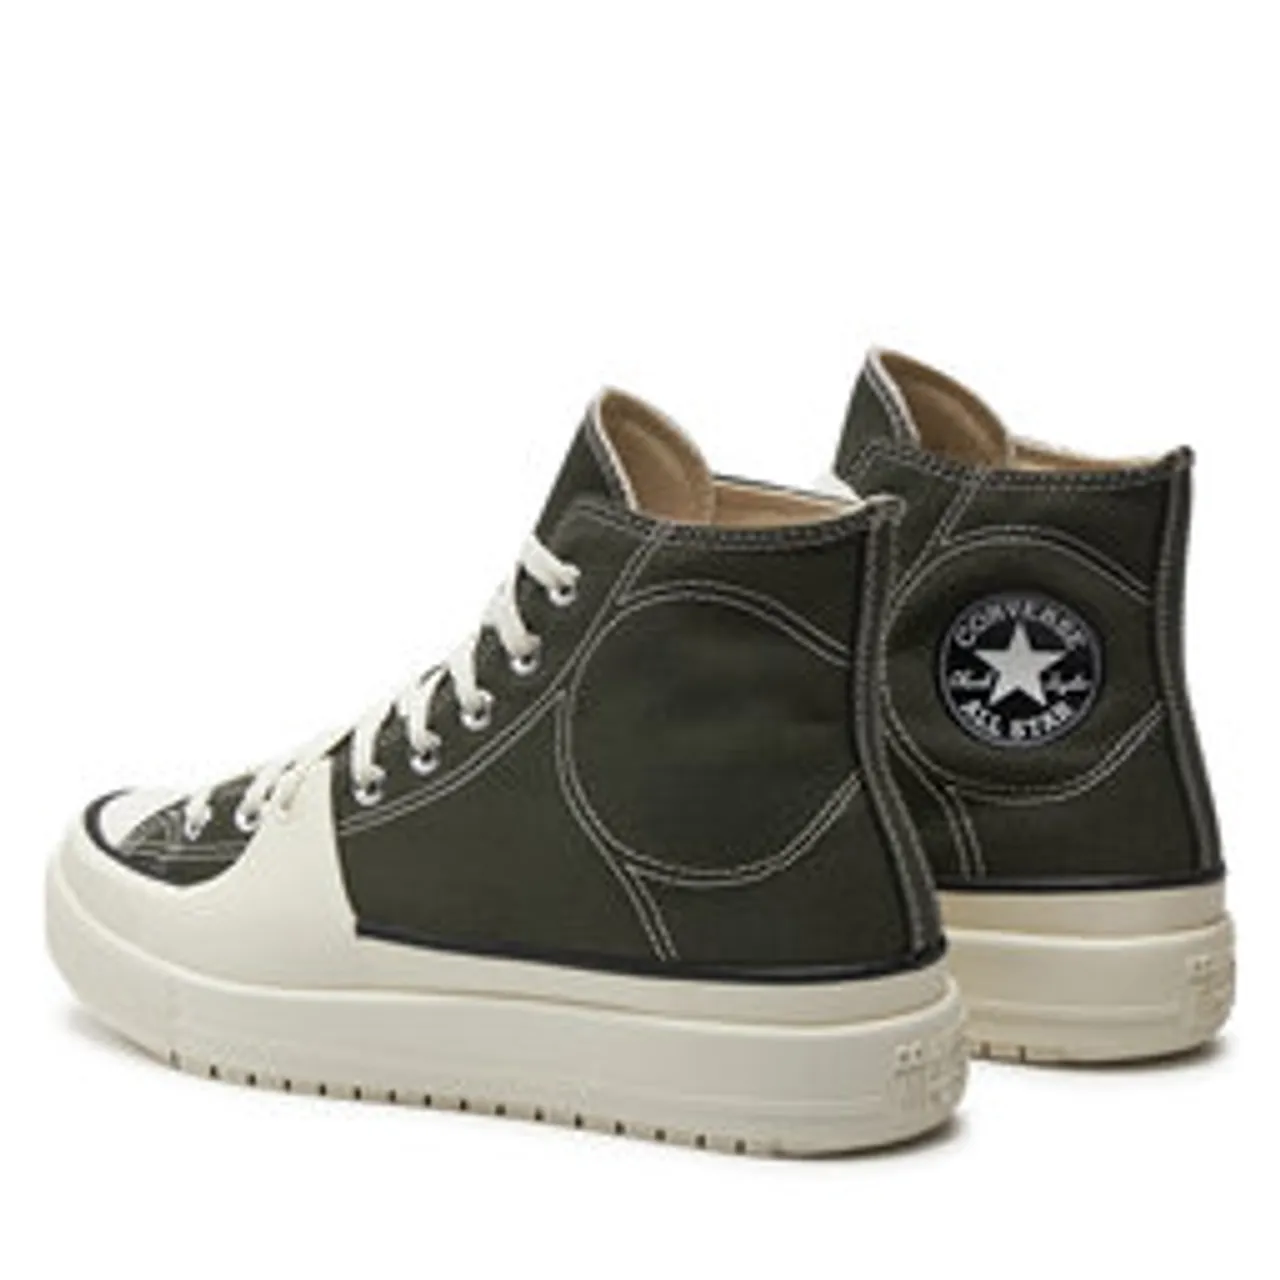 Sneakers aus Stoff Converse Chuck Taylor All Star Construct A06618C Cave Green/Black/White